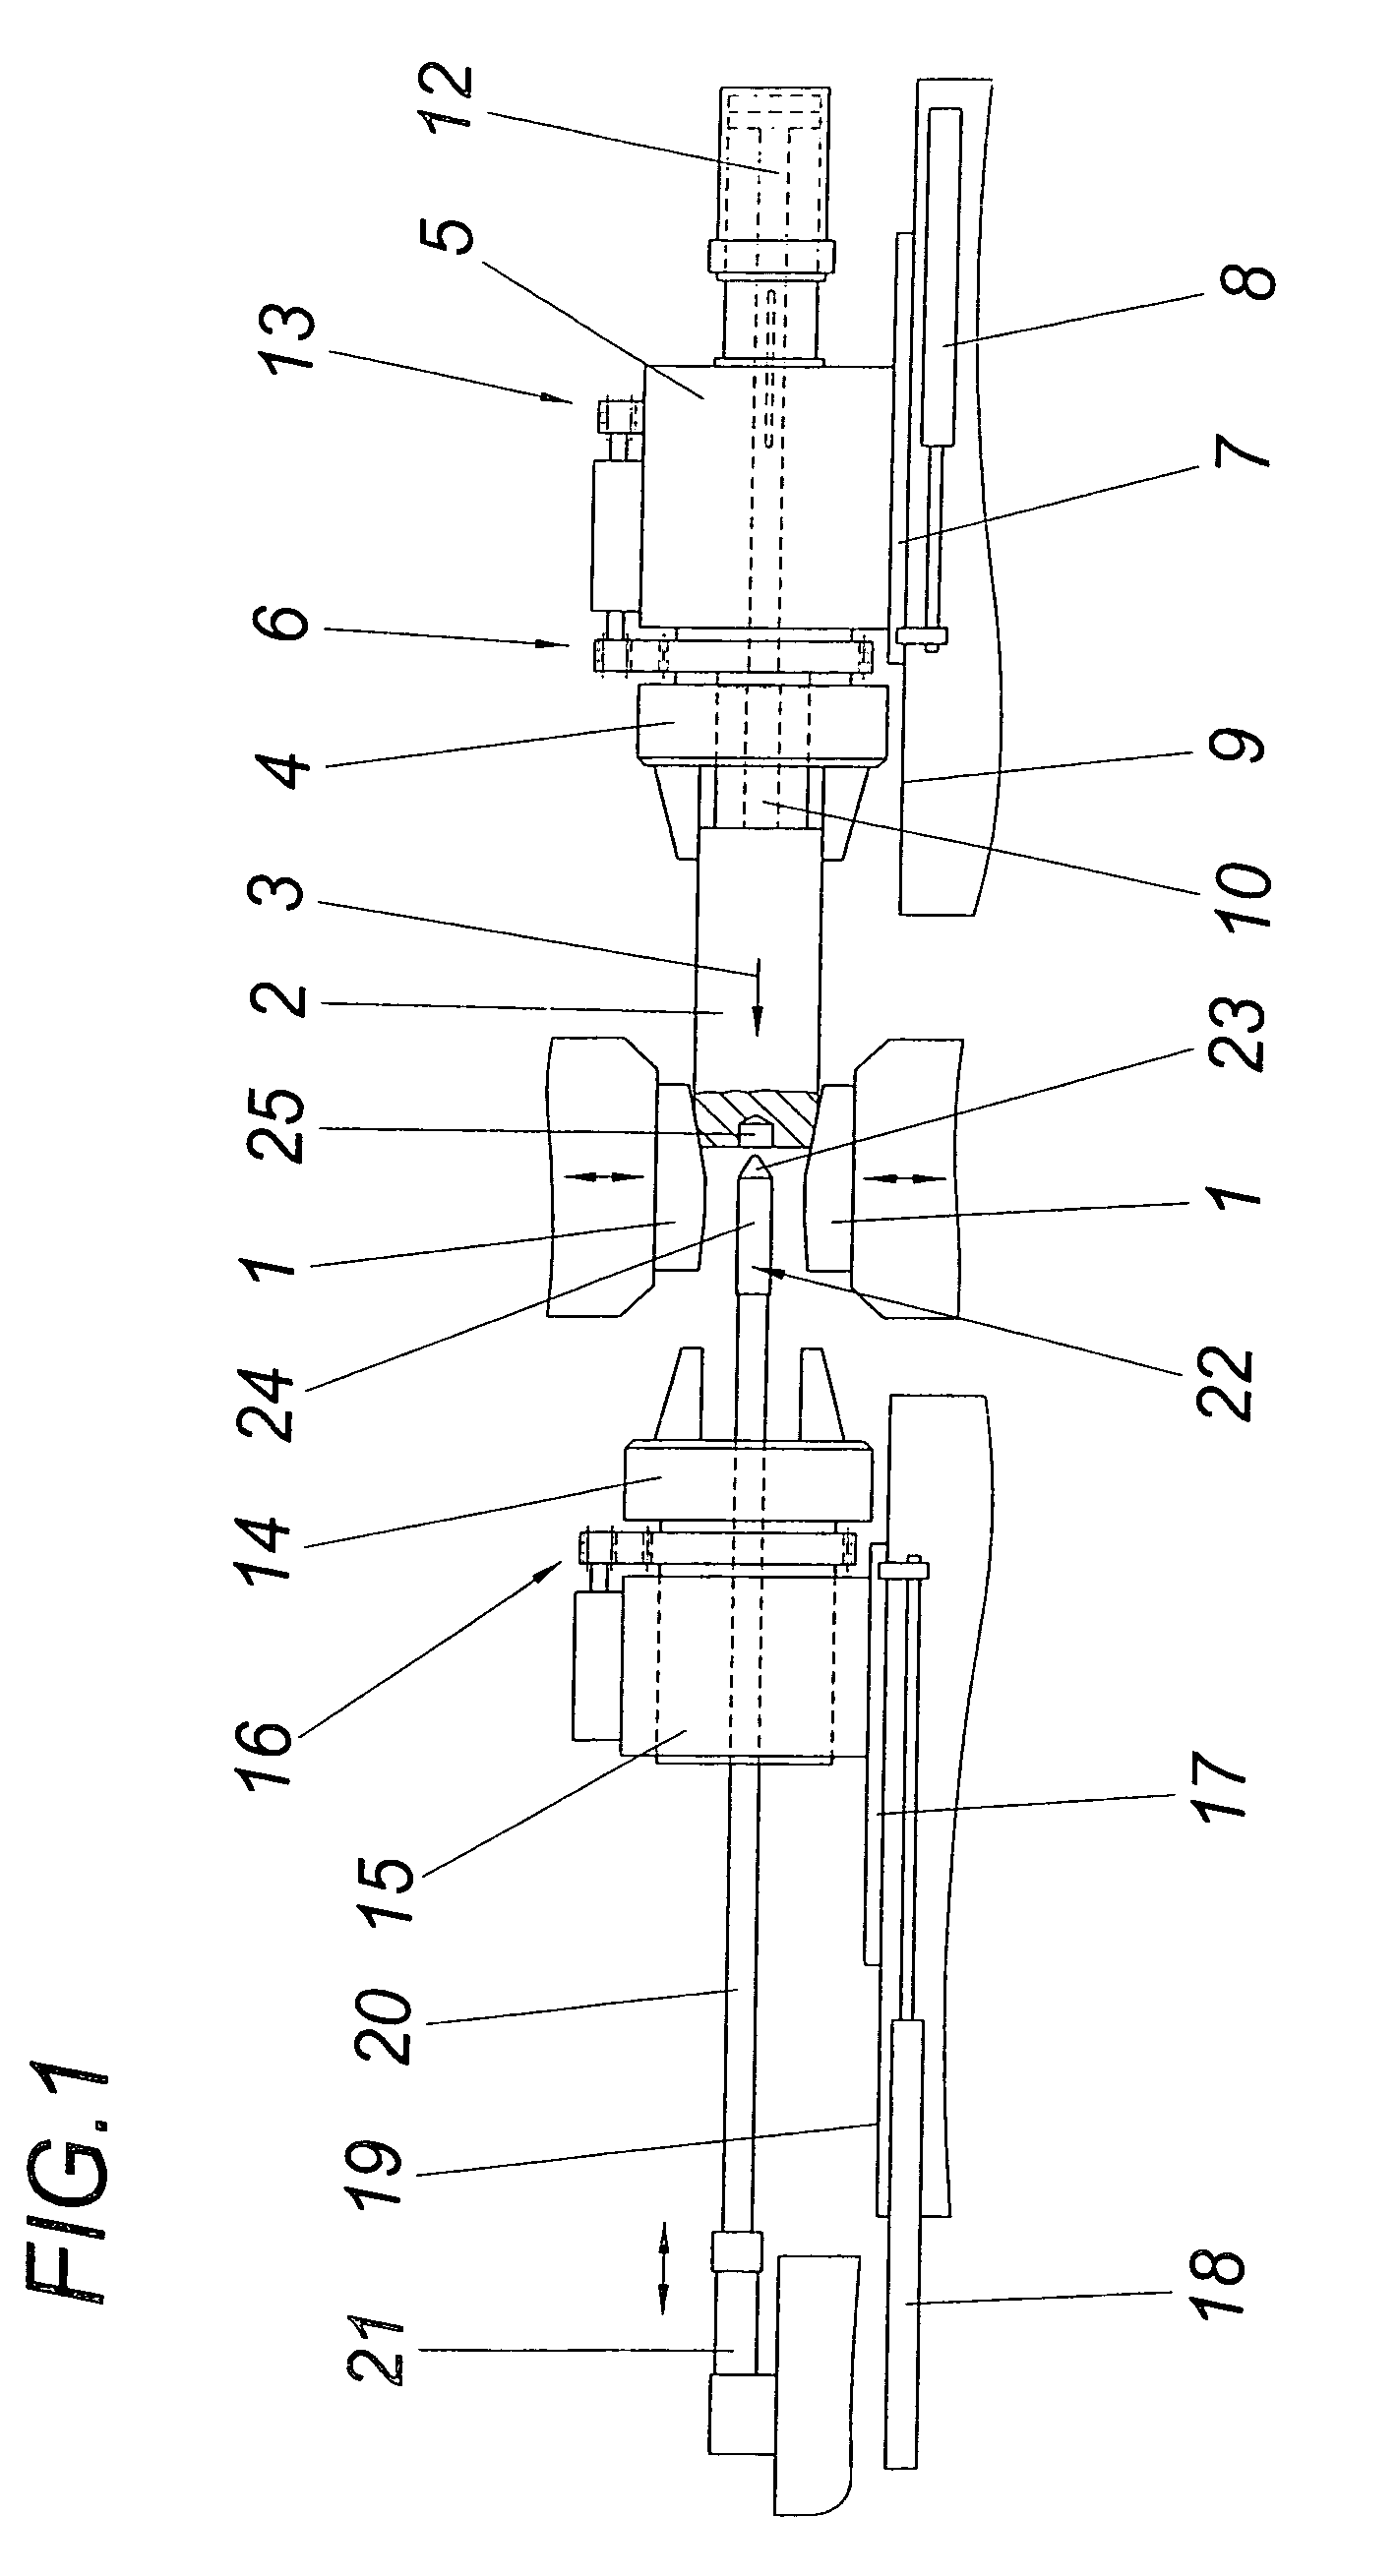 Method and apparatus for producing a cylindrical hollow body from a blank